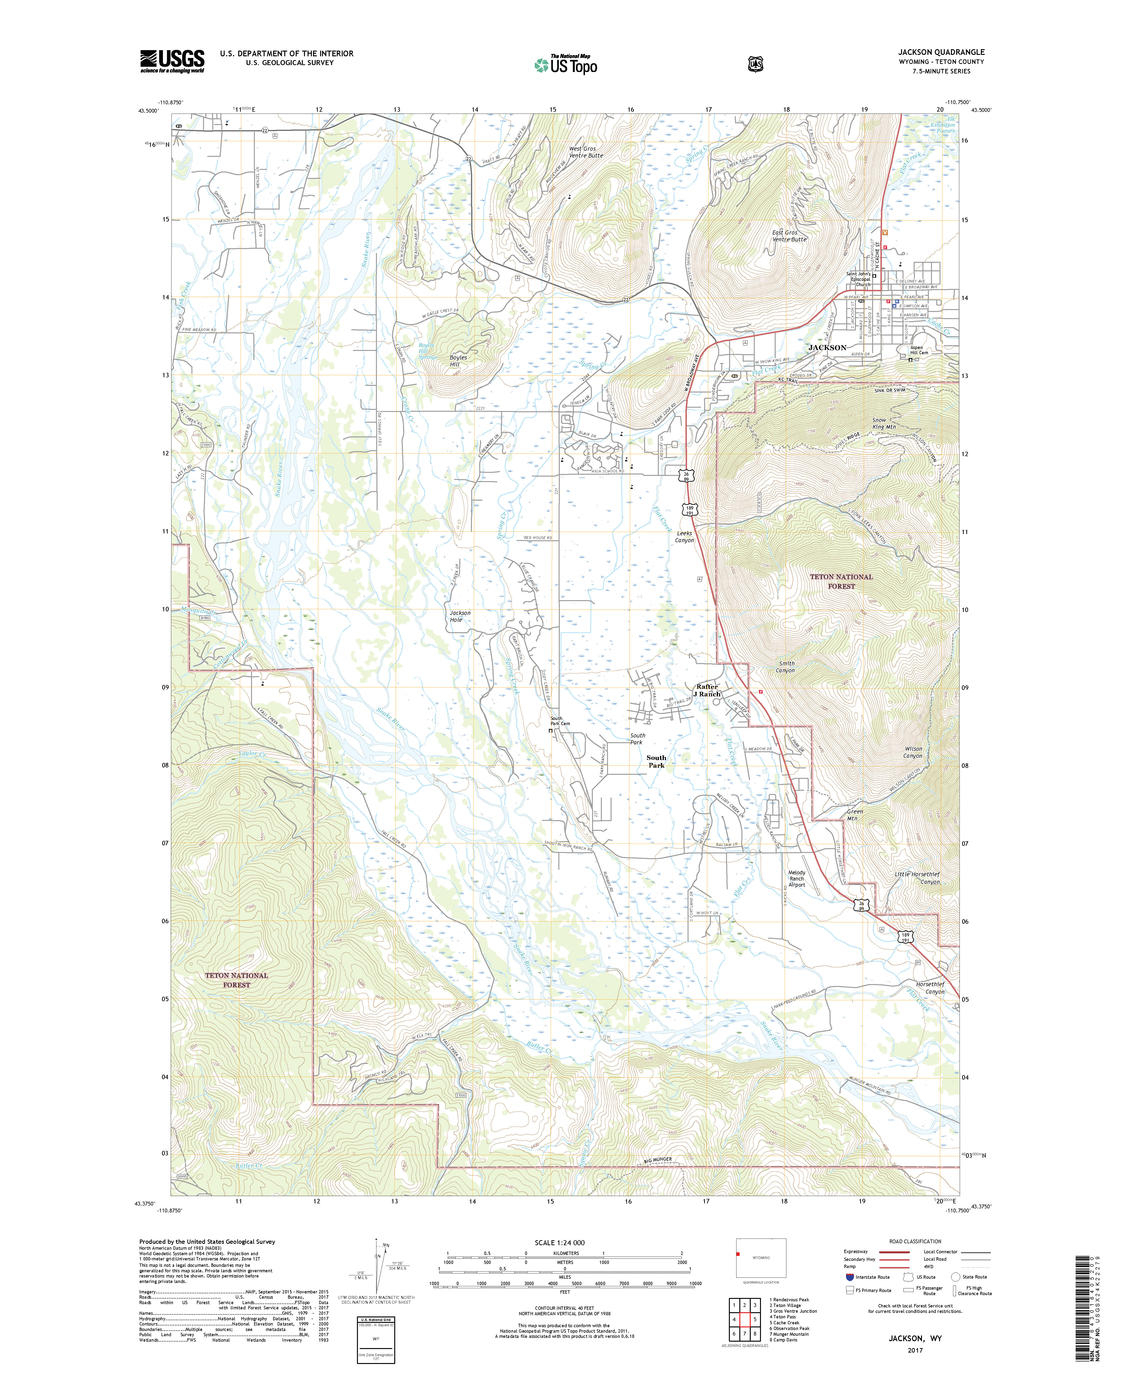 Printable Topographic Map Of The United States Printable Maps